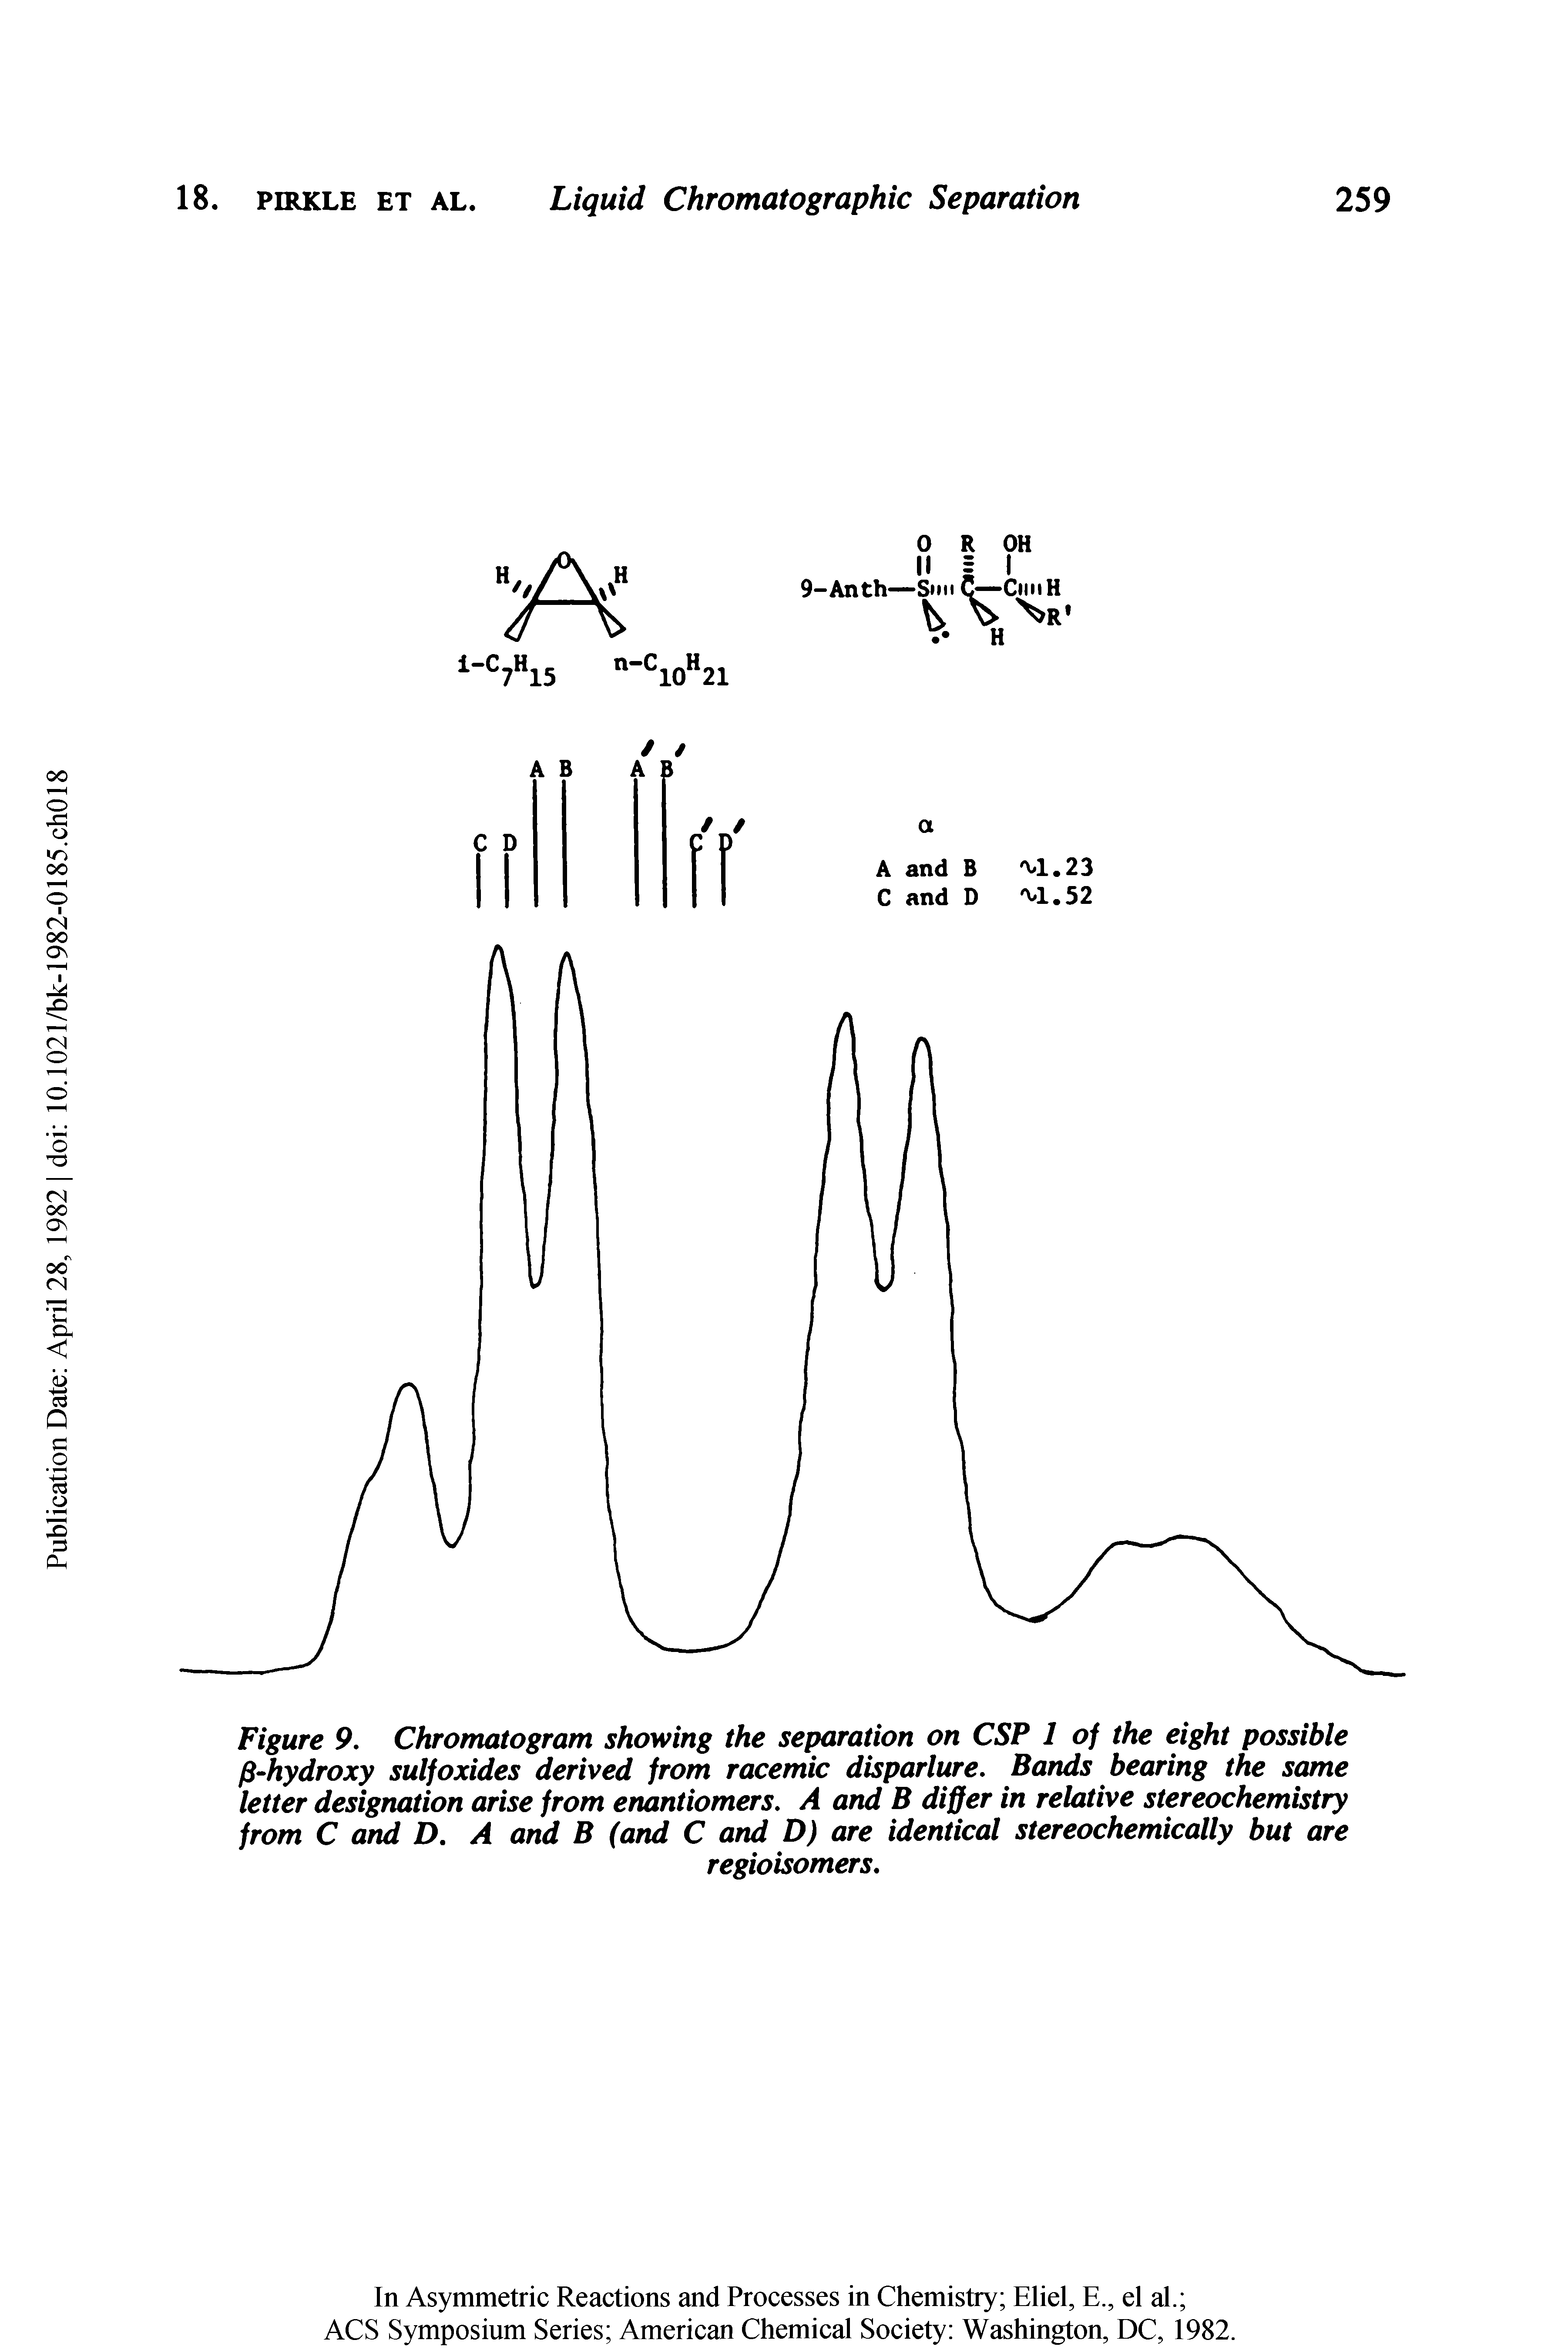 Figure 9, Chromatogram showing the separation on CSP 1 of the eight possible P ydroxy sulfoxides derived from racemic disparlure. Bands bearing the same letter designation arise from enantiomers, A and B differ in relative stereochemistry from C and D, A and B (and C and D) are identical stereochemically but are...